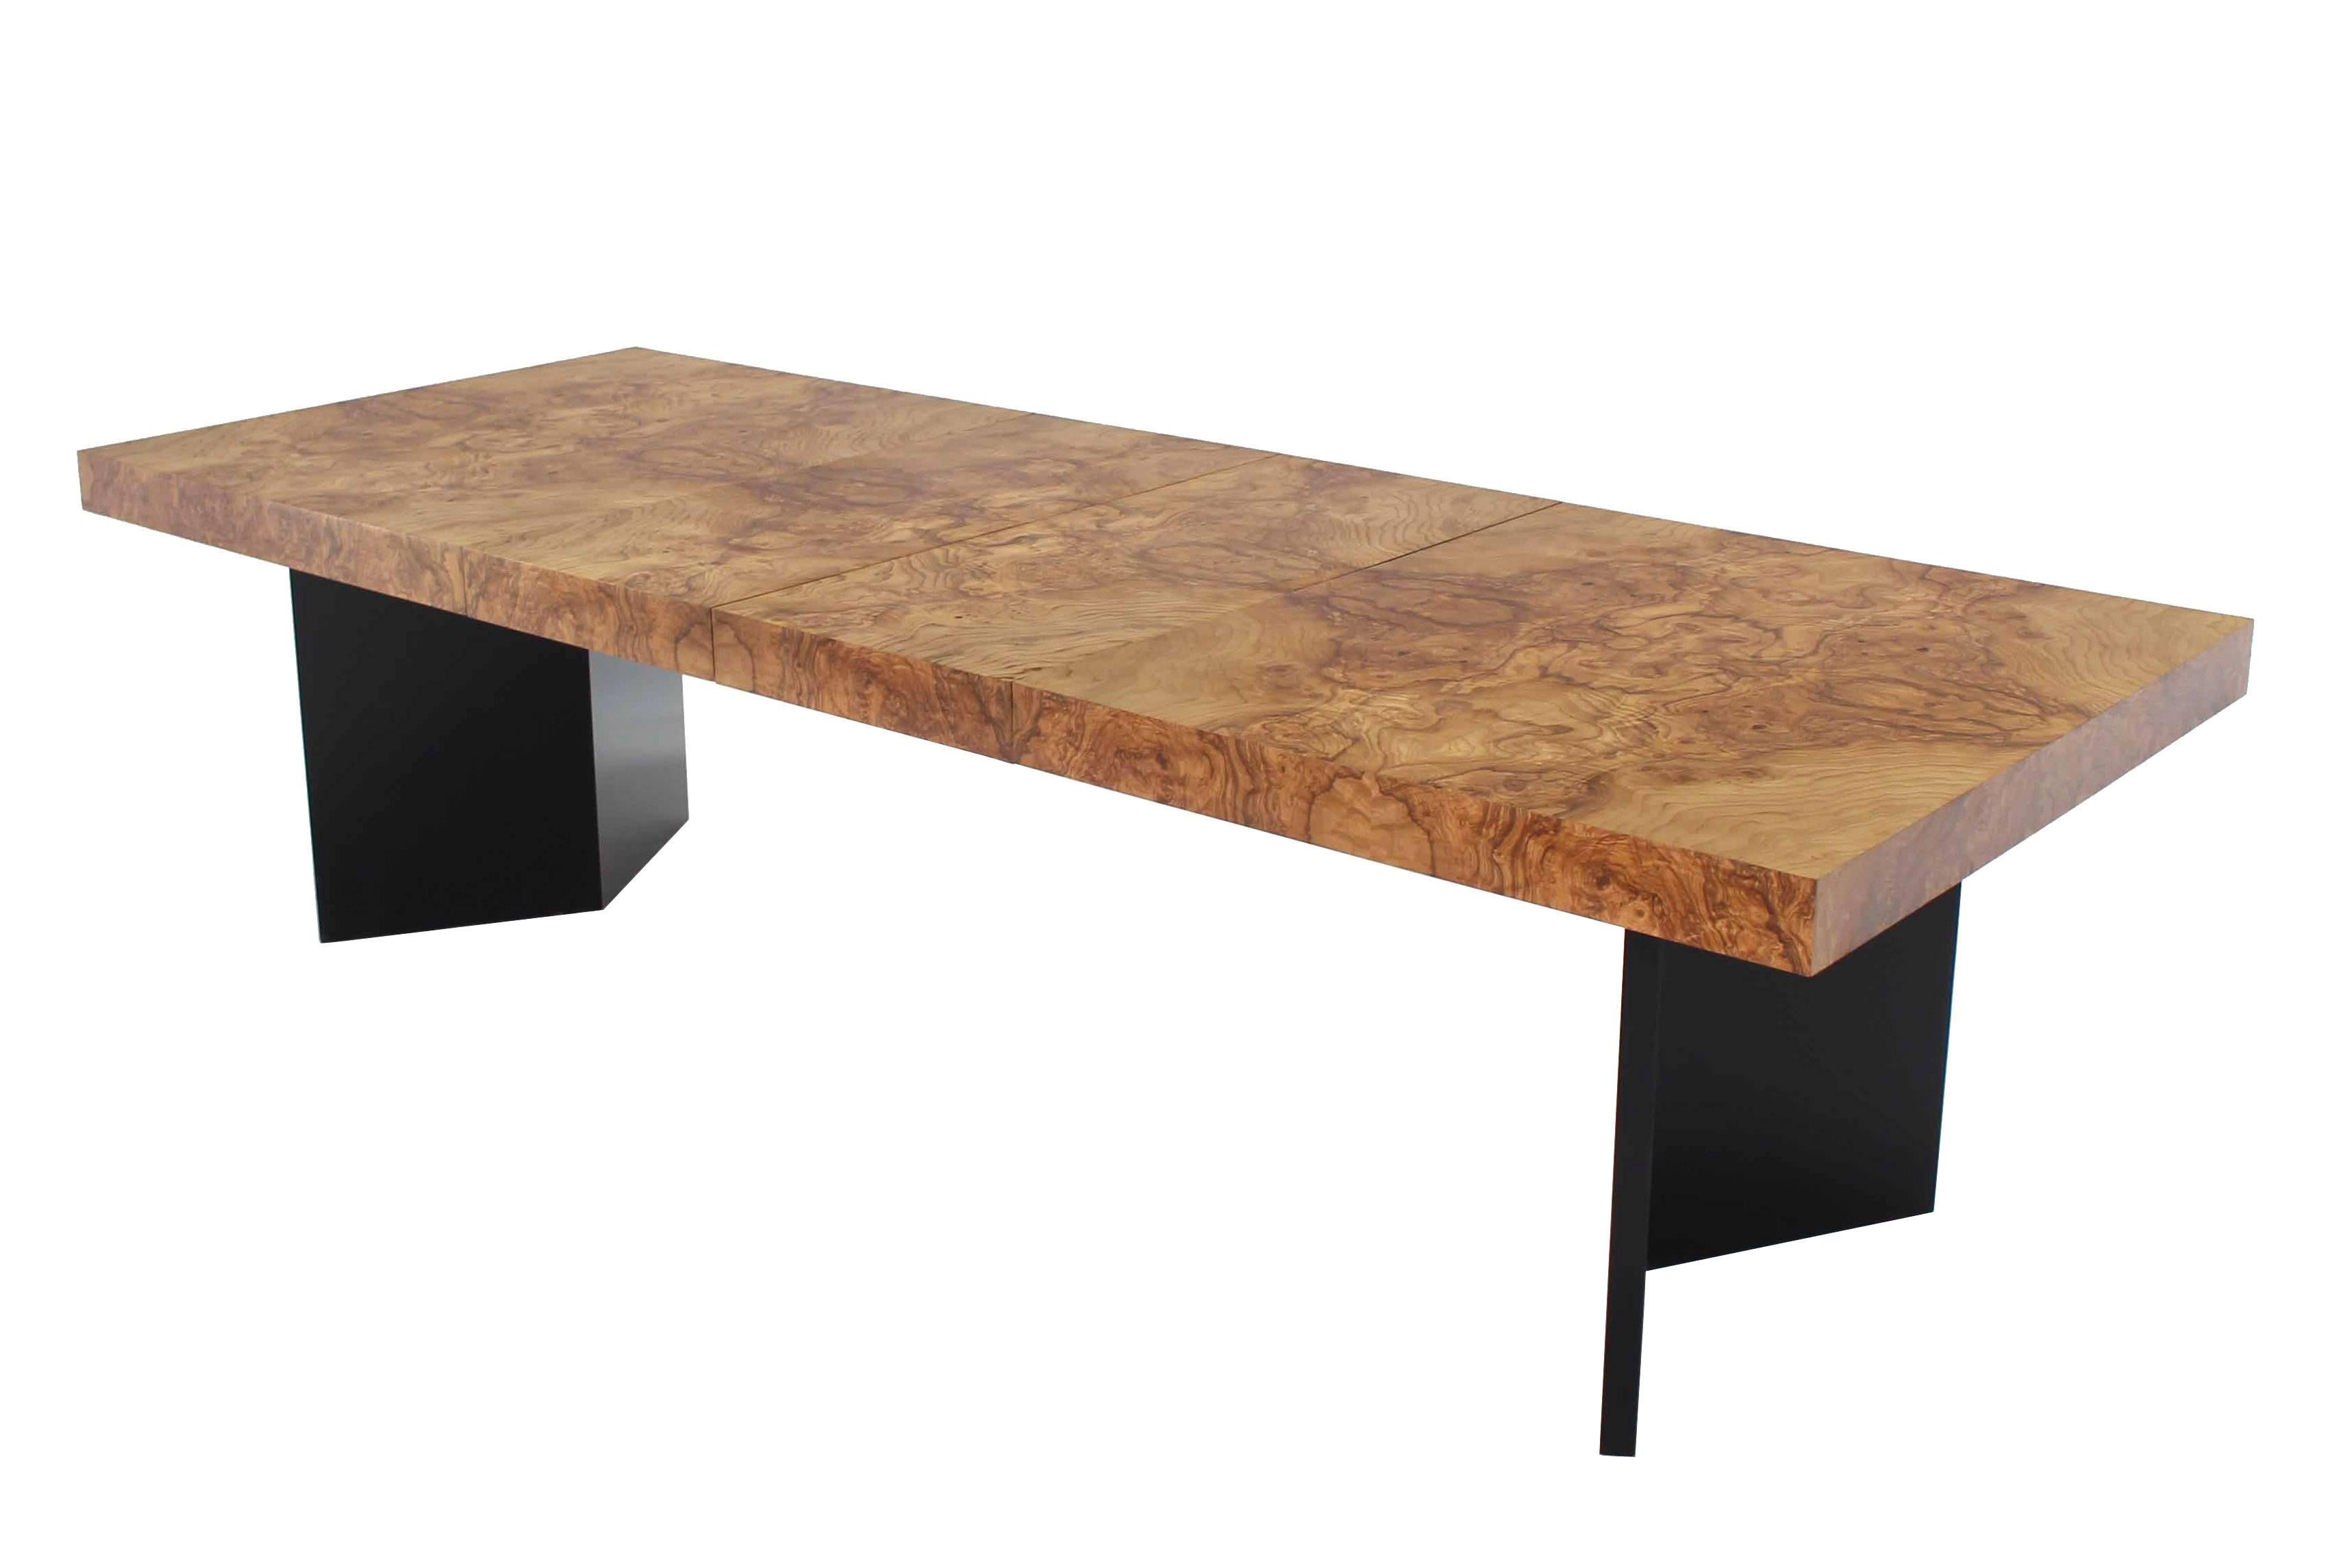 Lacquered Burl Wood Dining Table Black Lacquer Base Two Extension Leaves